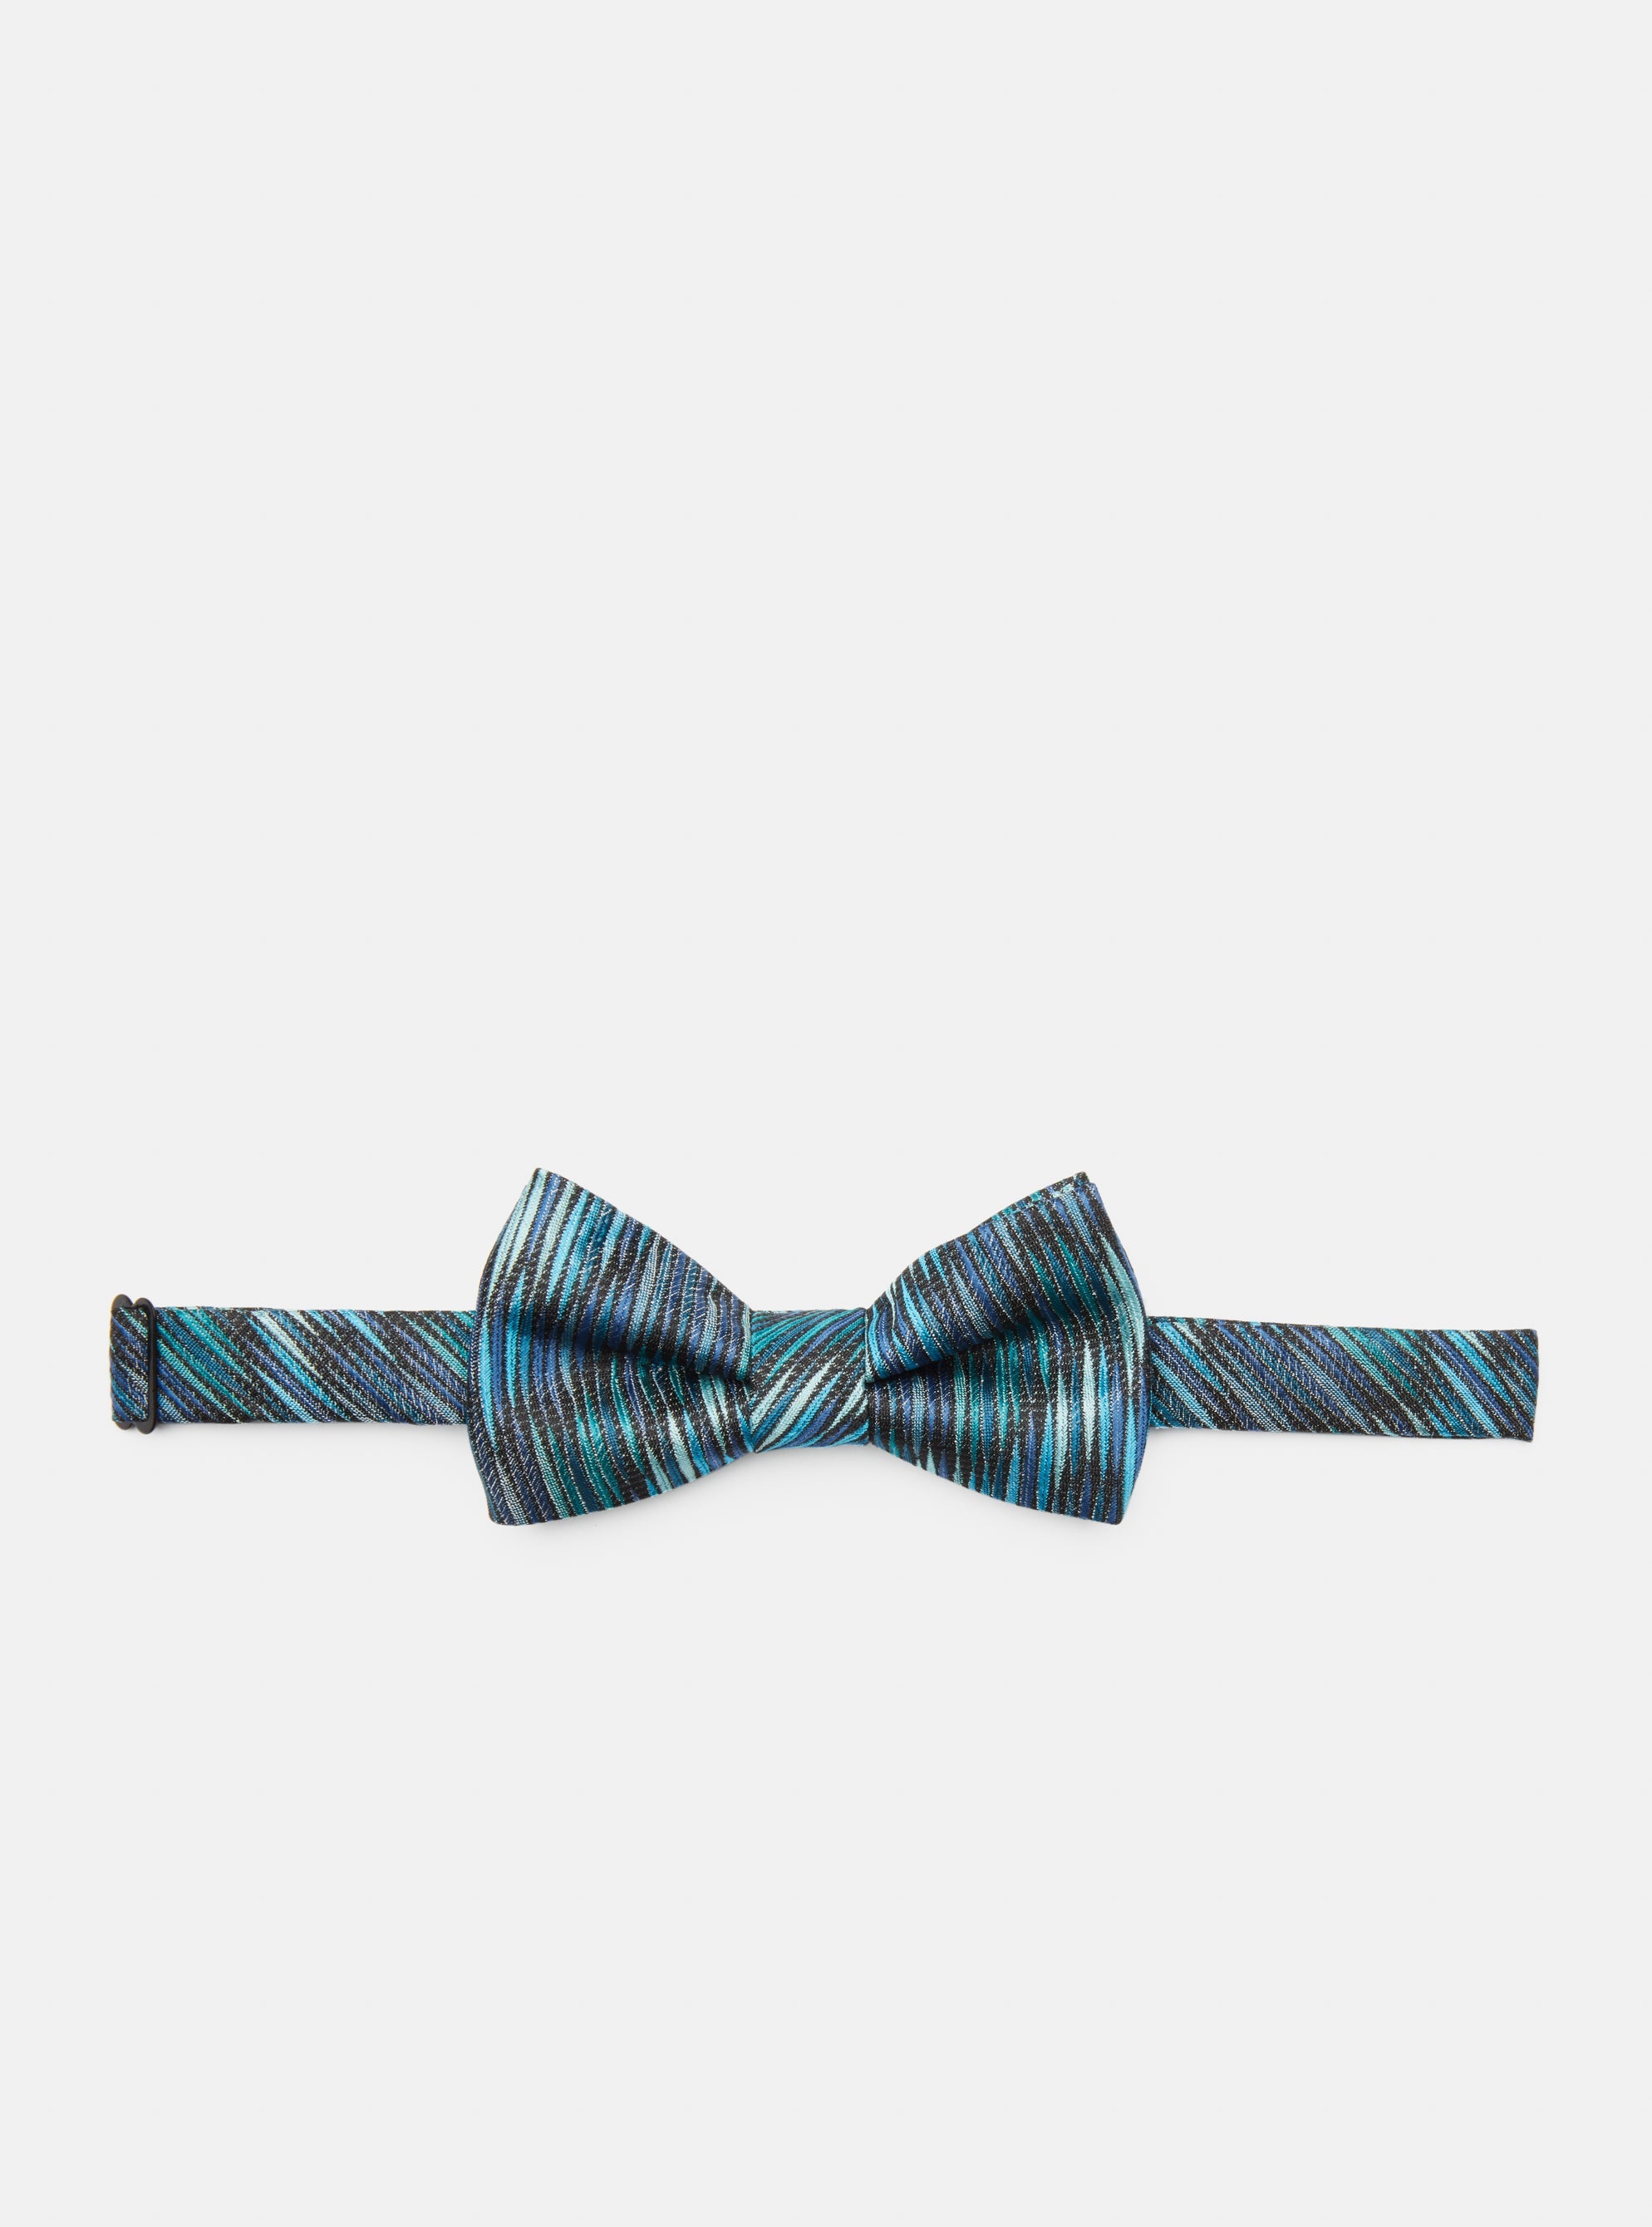 waterfall bow tie